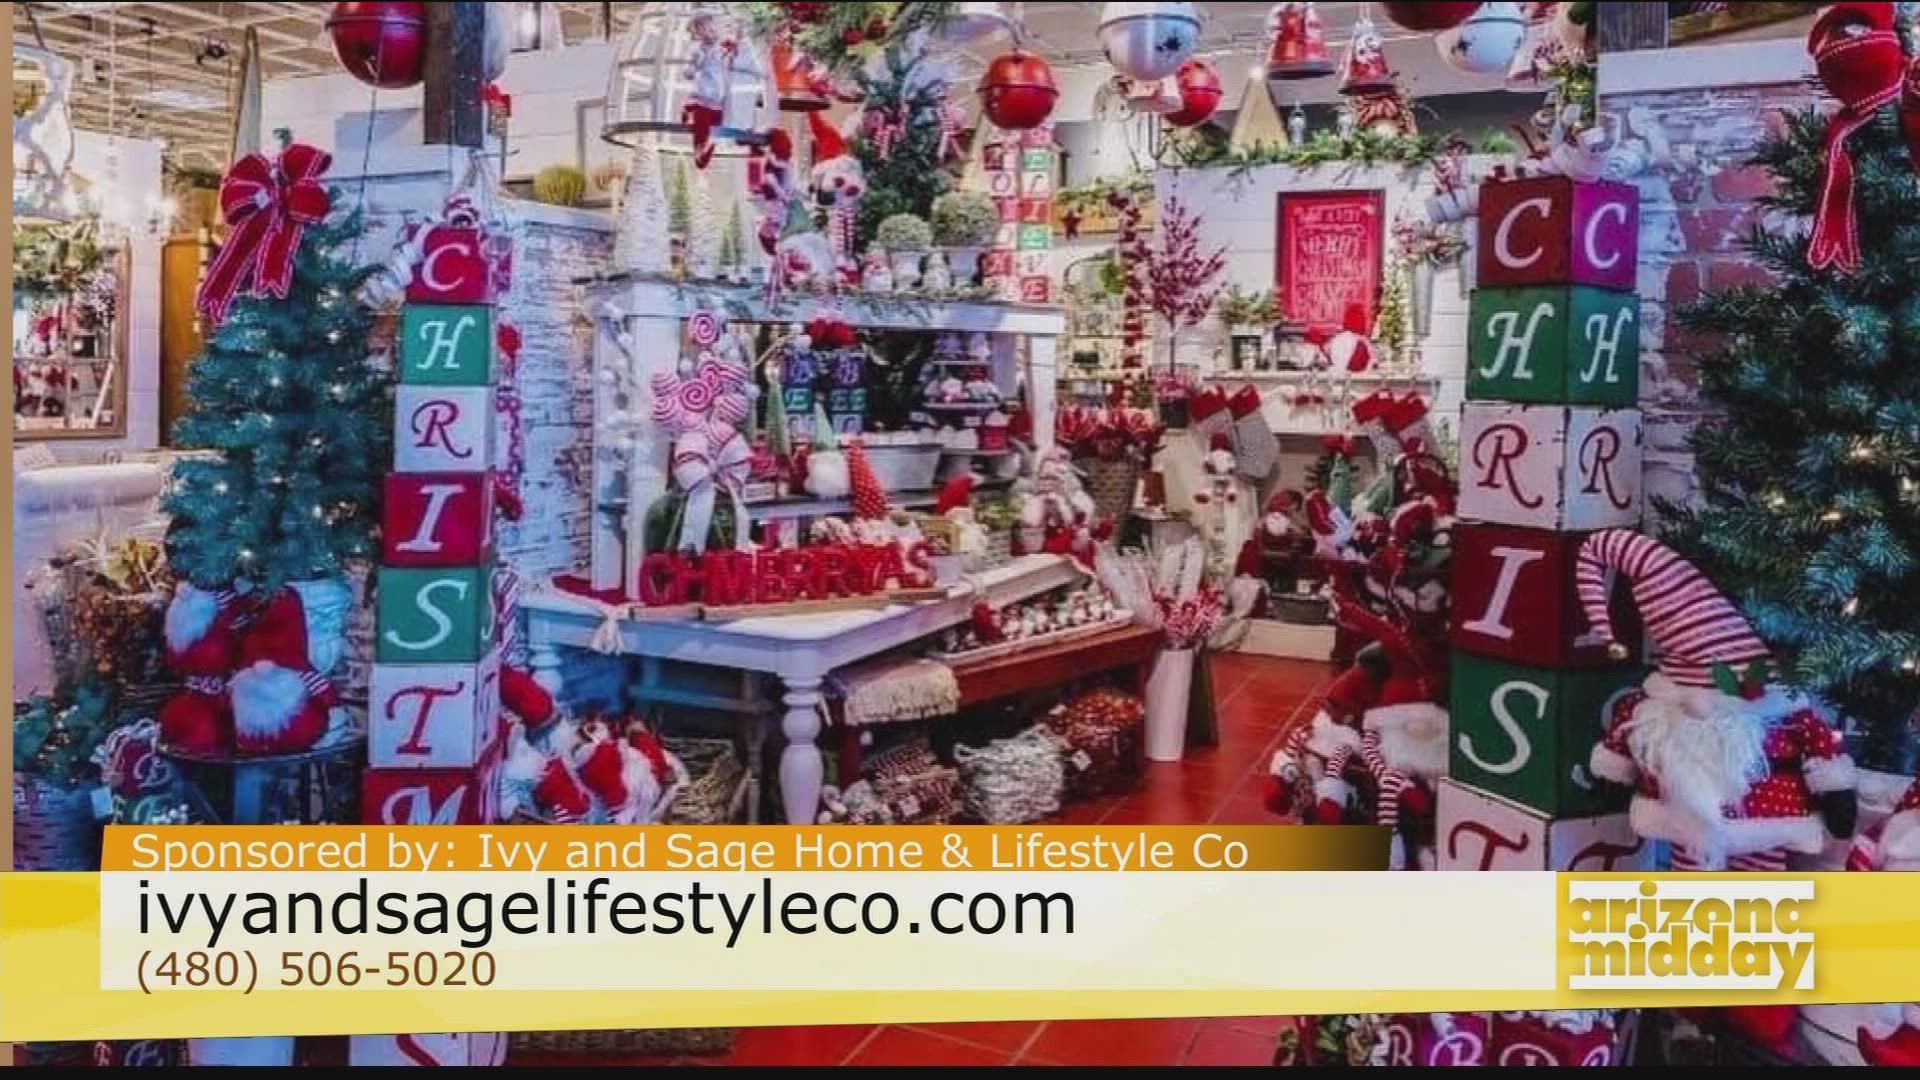 Kim Davis with Ivy & Sage Lifestyle Co shows us some of the cute finds at their Christmas Market!